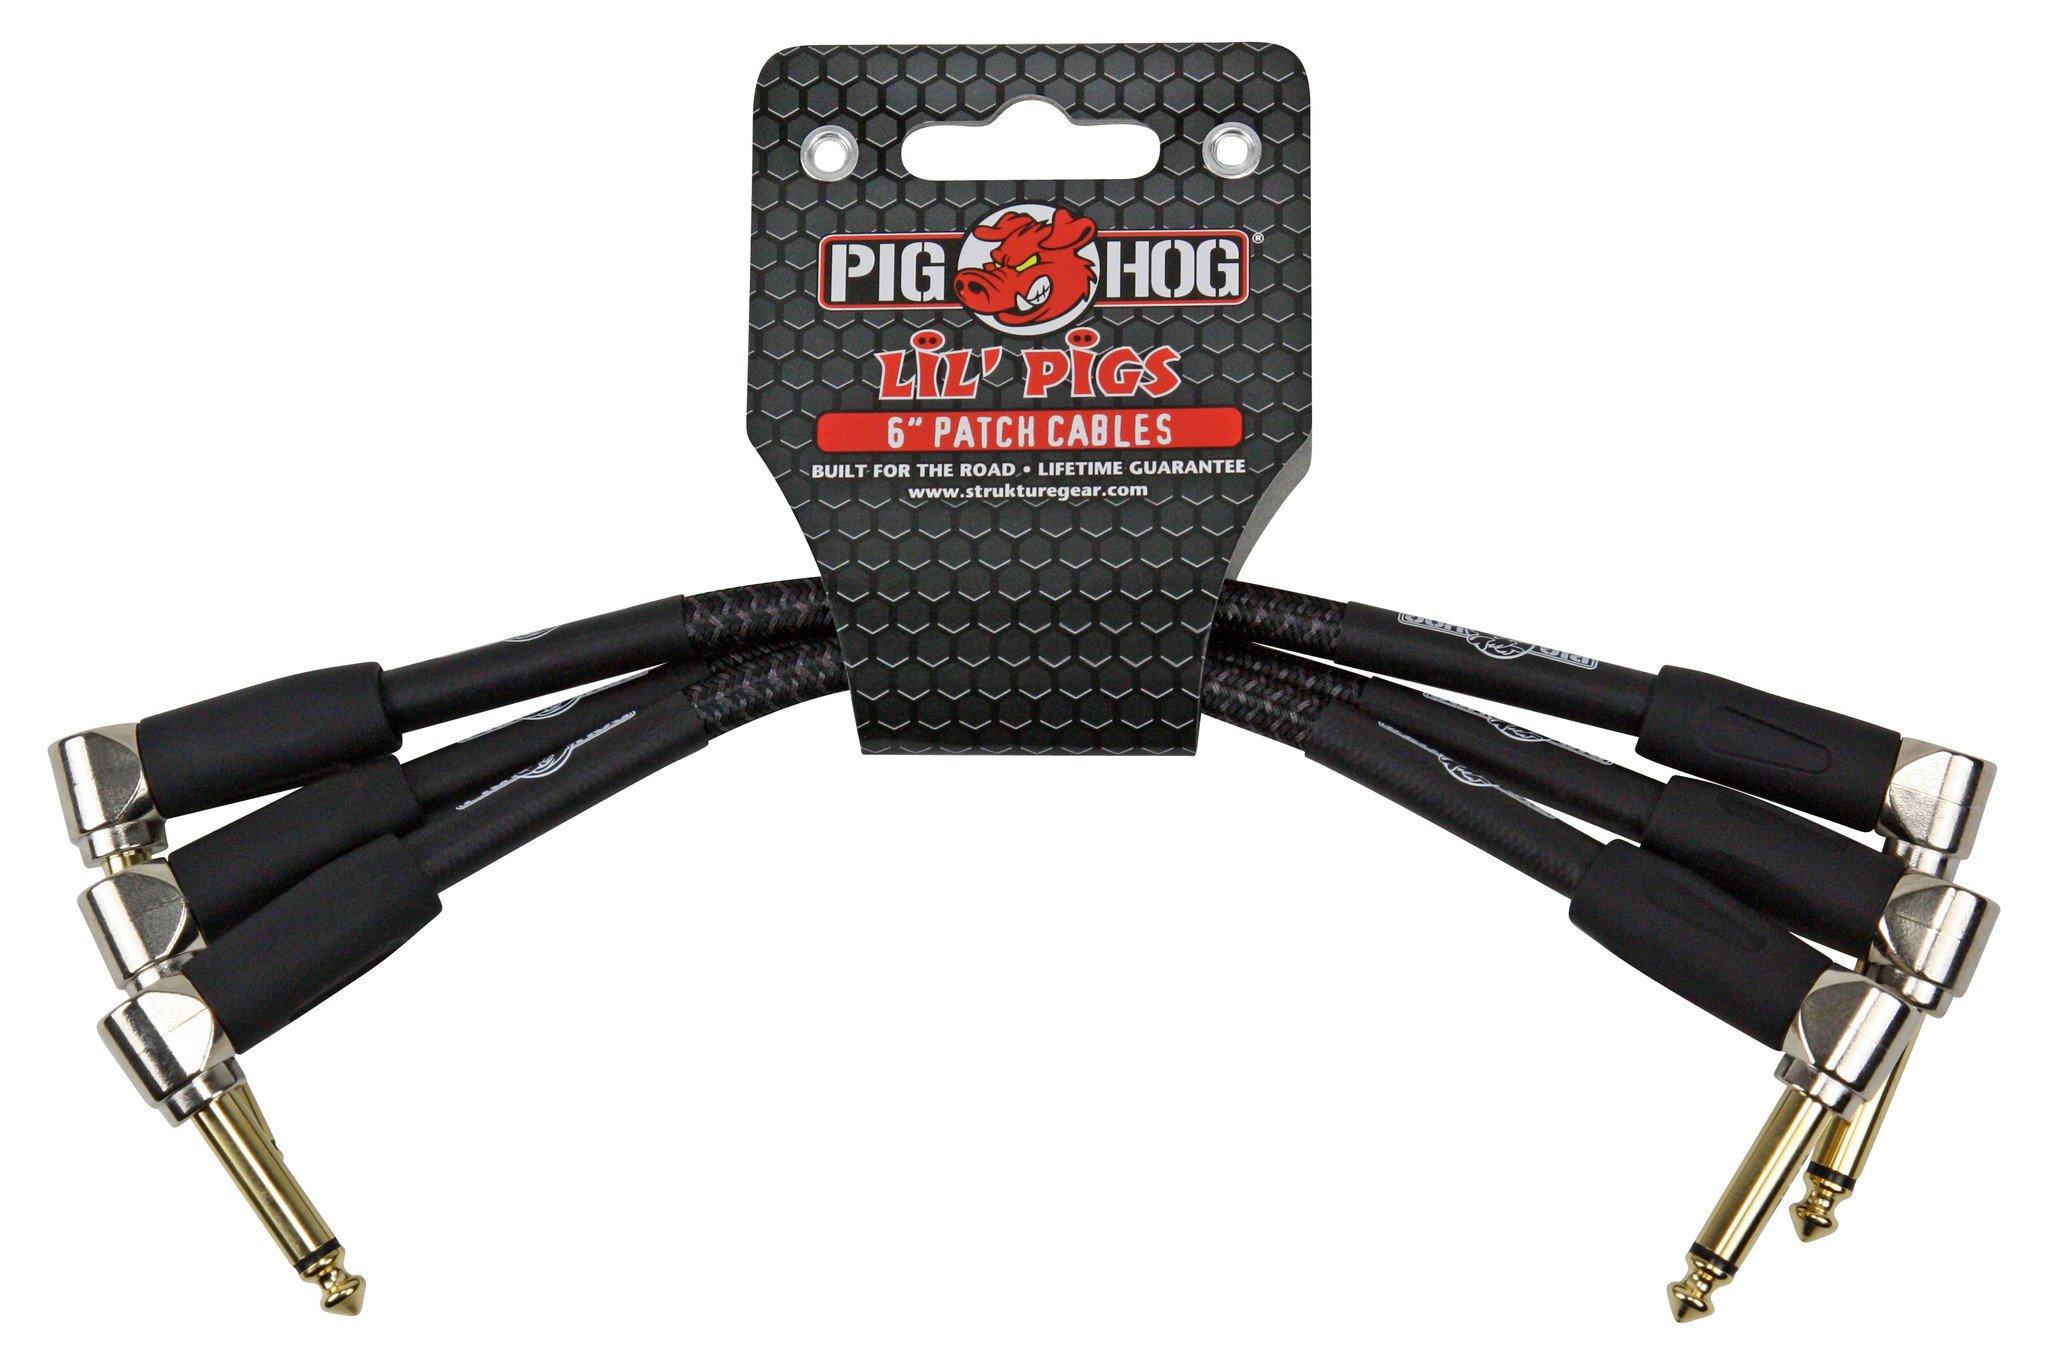 Pig Hog Lil Pigs Vintage "Black Woven" 6in Patch Cables - 3 pack